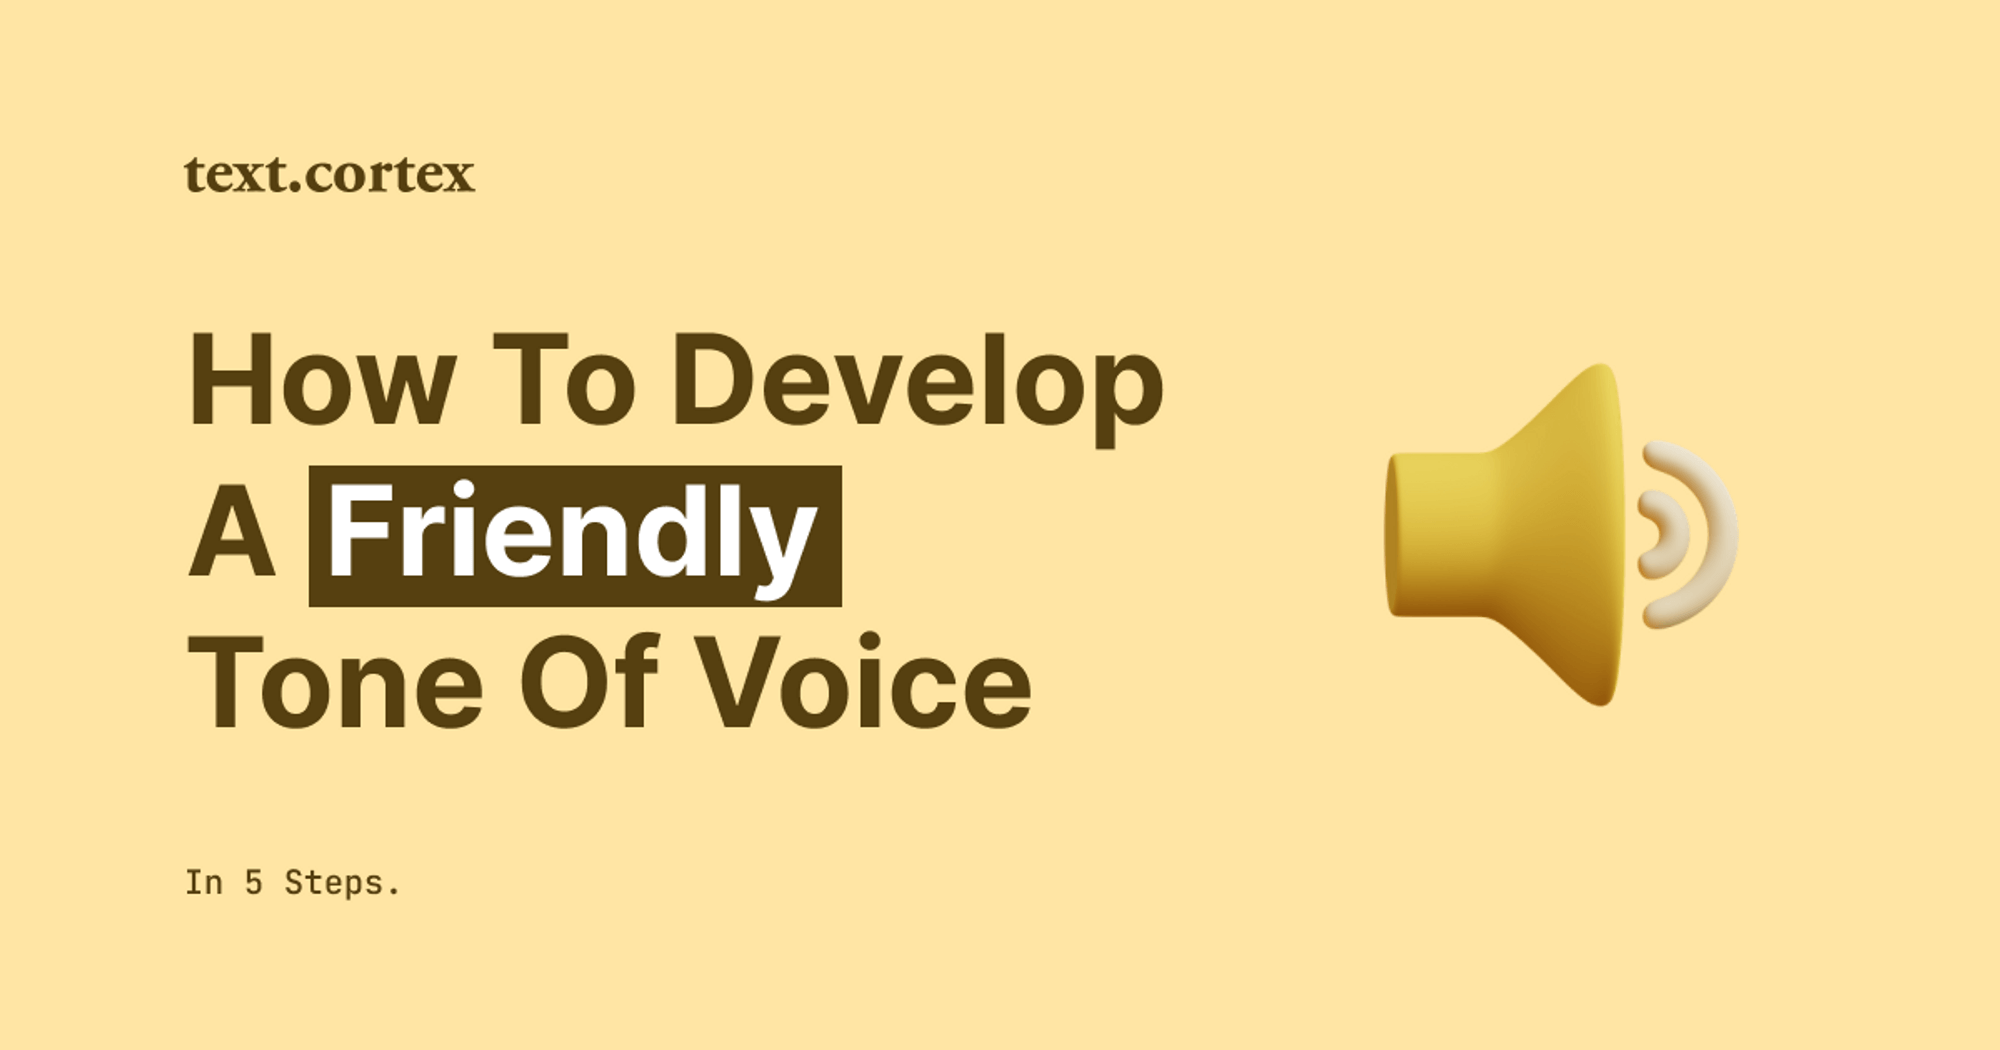 How To Develop a Friendly Tone of Voice in 5 Steps